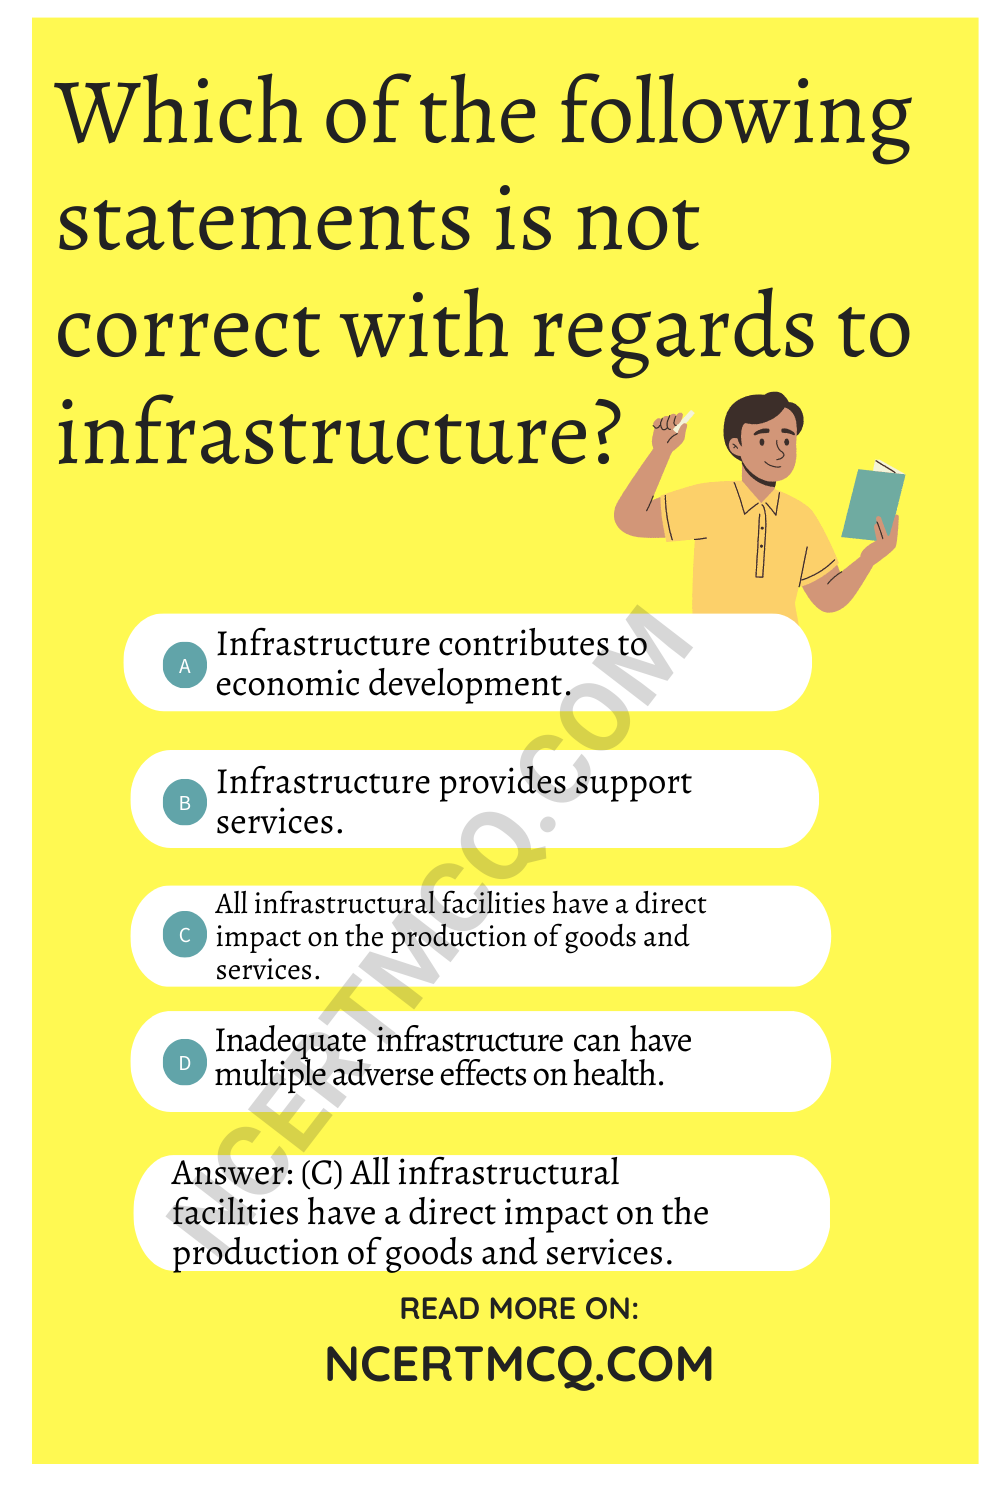 Which of the following statements is not correct with regards to infrastructure?